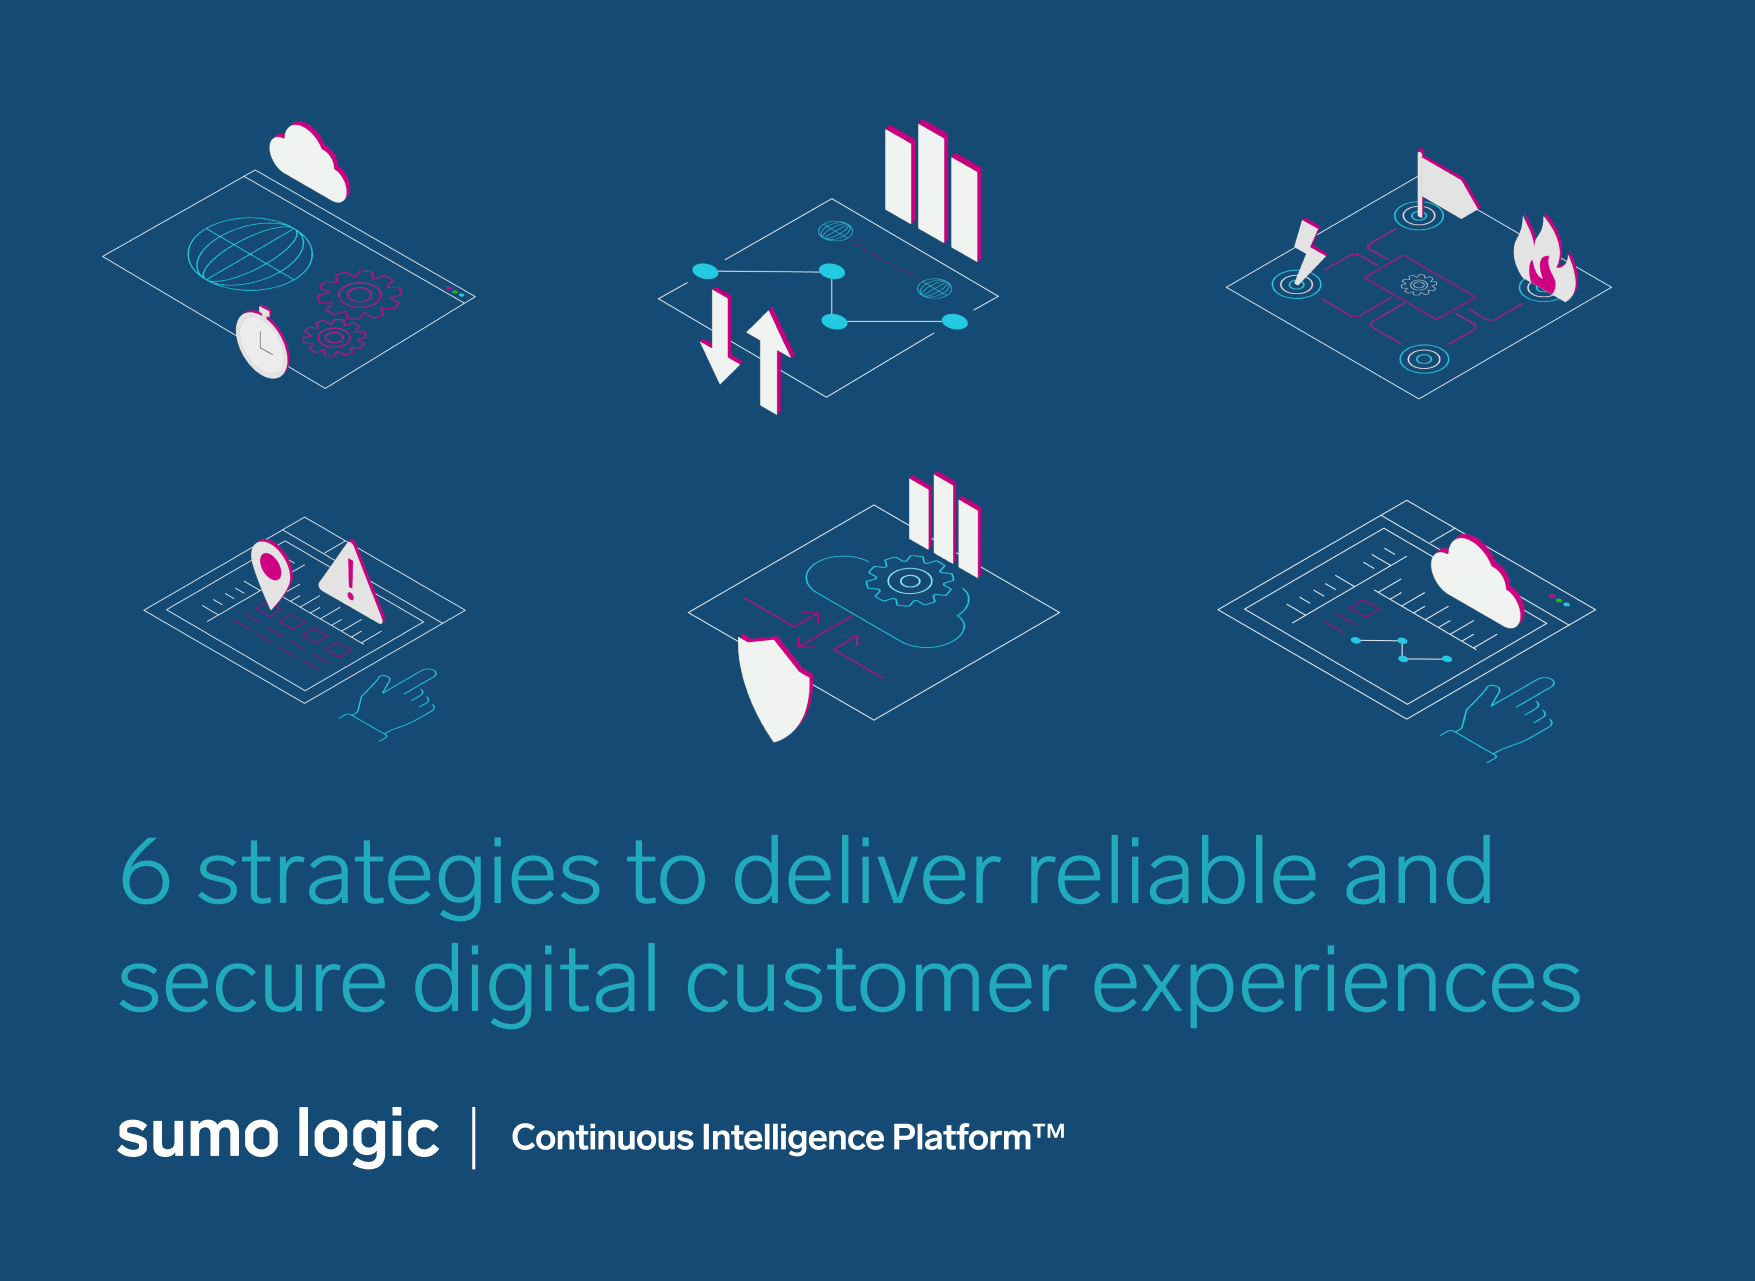 Six strategies to deliver reliable and secure digital customer experiences